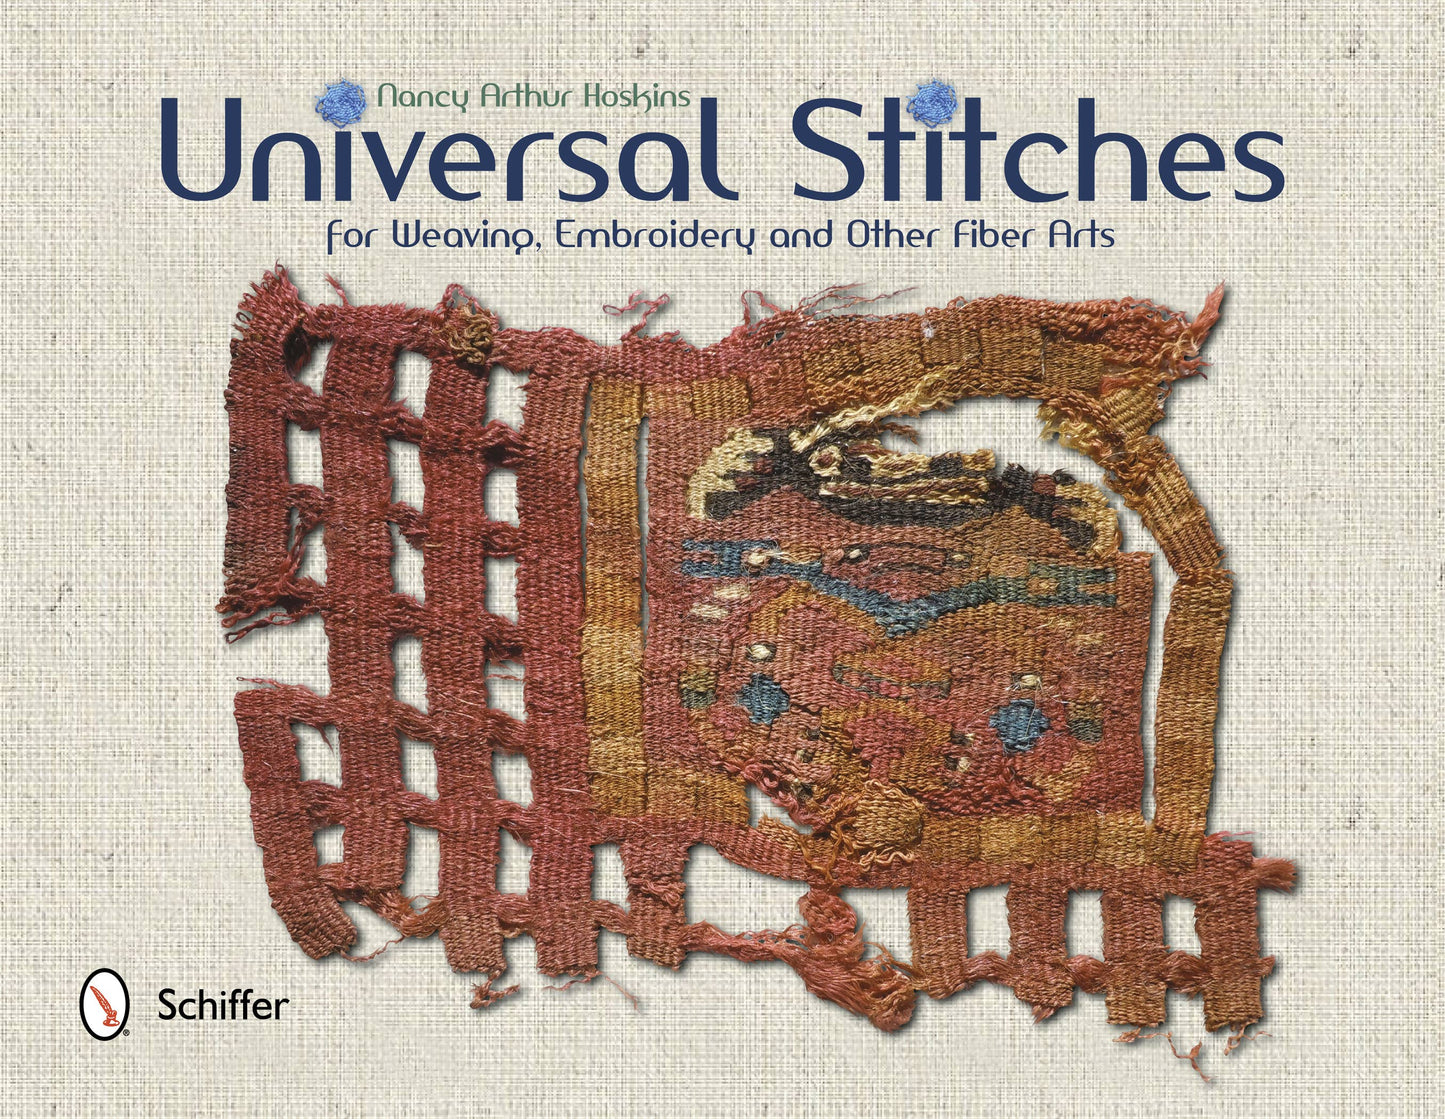 book cover with title "universal stitches for weaving, embroidery, and other fiber arts" with an image of a stitched fabric